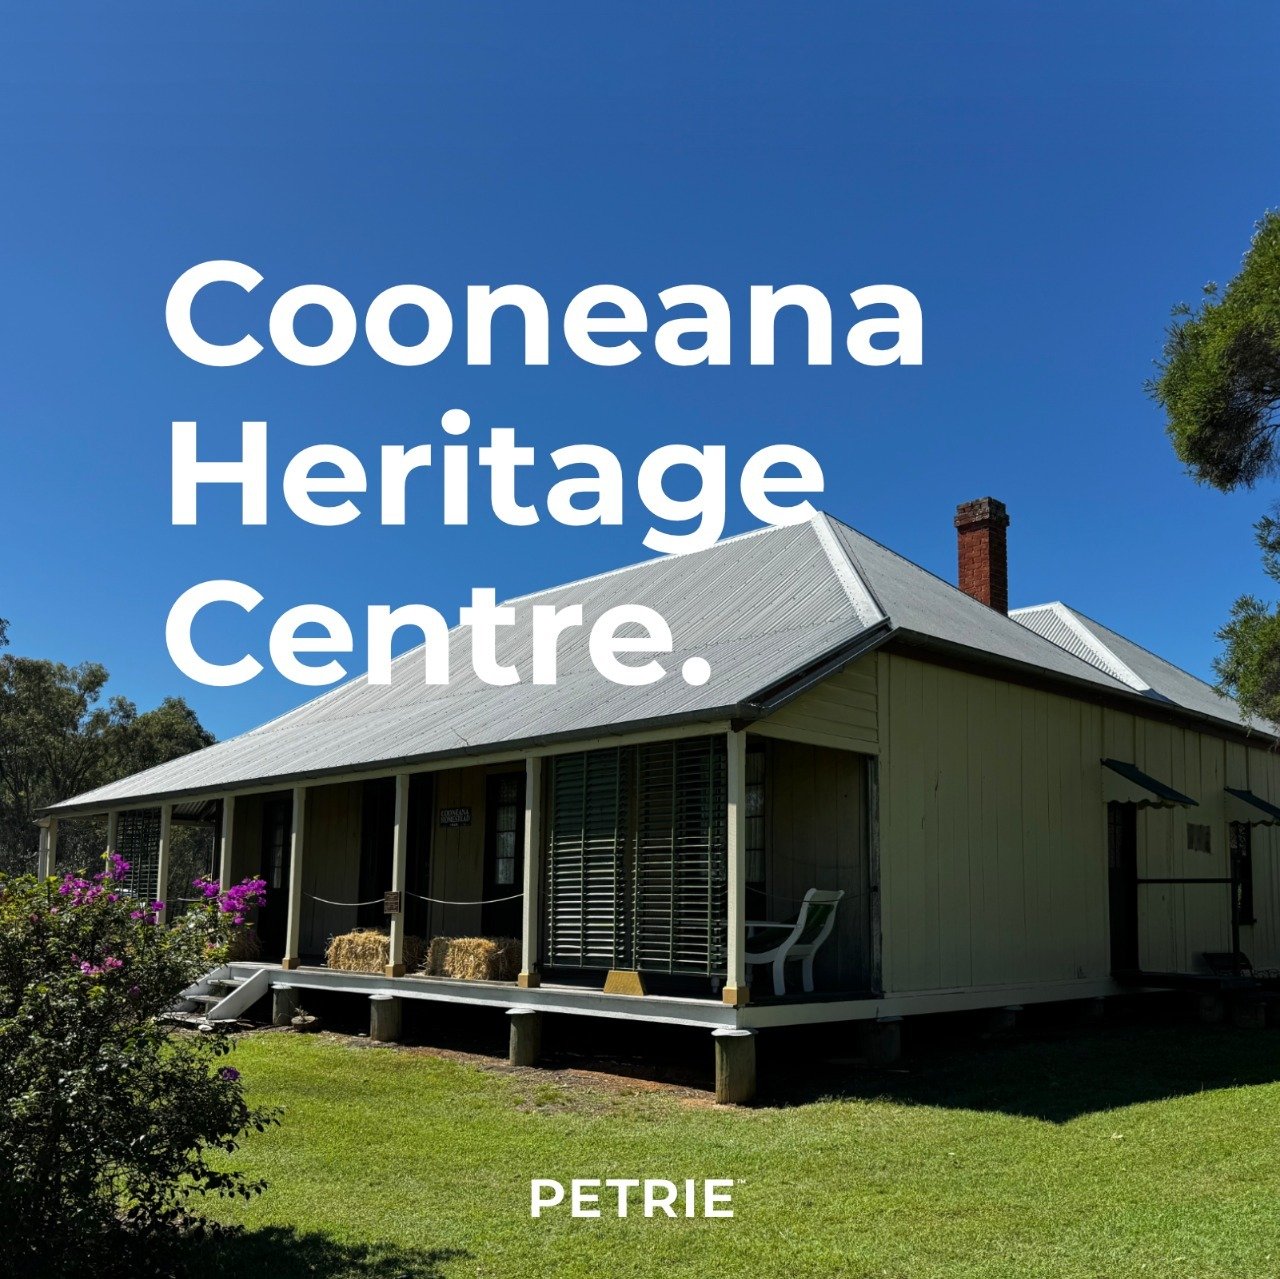 ∘ Cooneana Heritage Centre ∘

Petrie is assisting the Ipswich Historical Society with a new masterplan and project management services! The Cooneana Heritage Centre houses six architecturally significant buildings dating from the 1860s to the 1970s. 